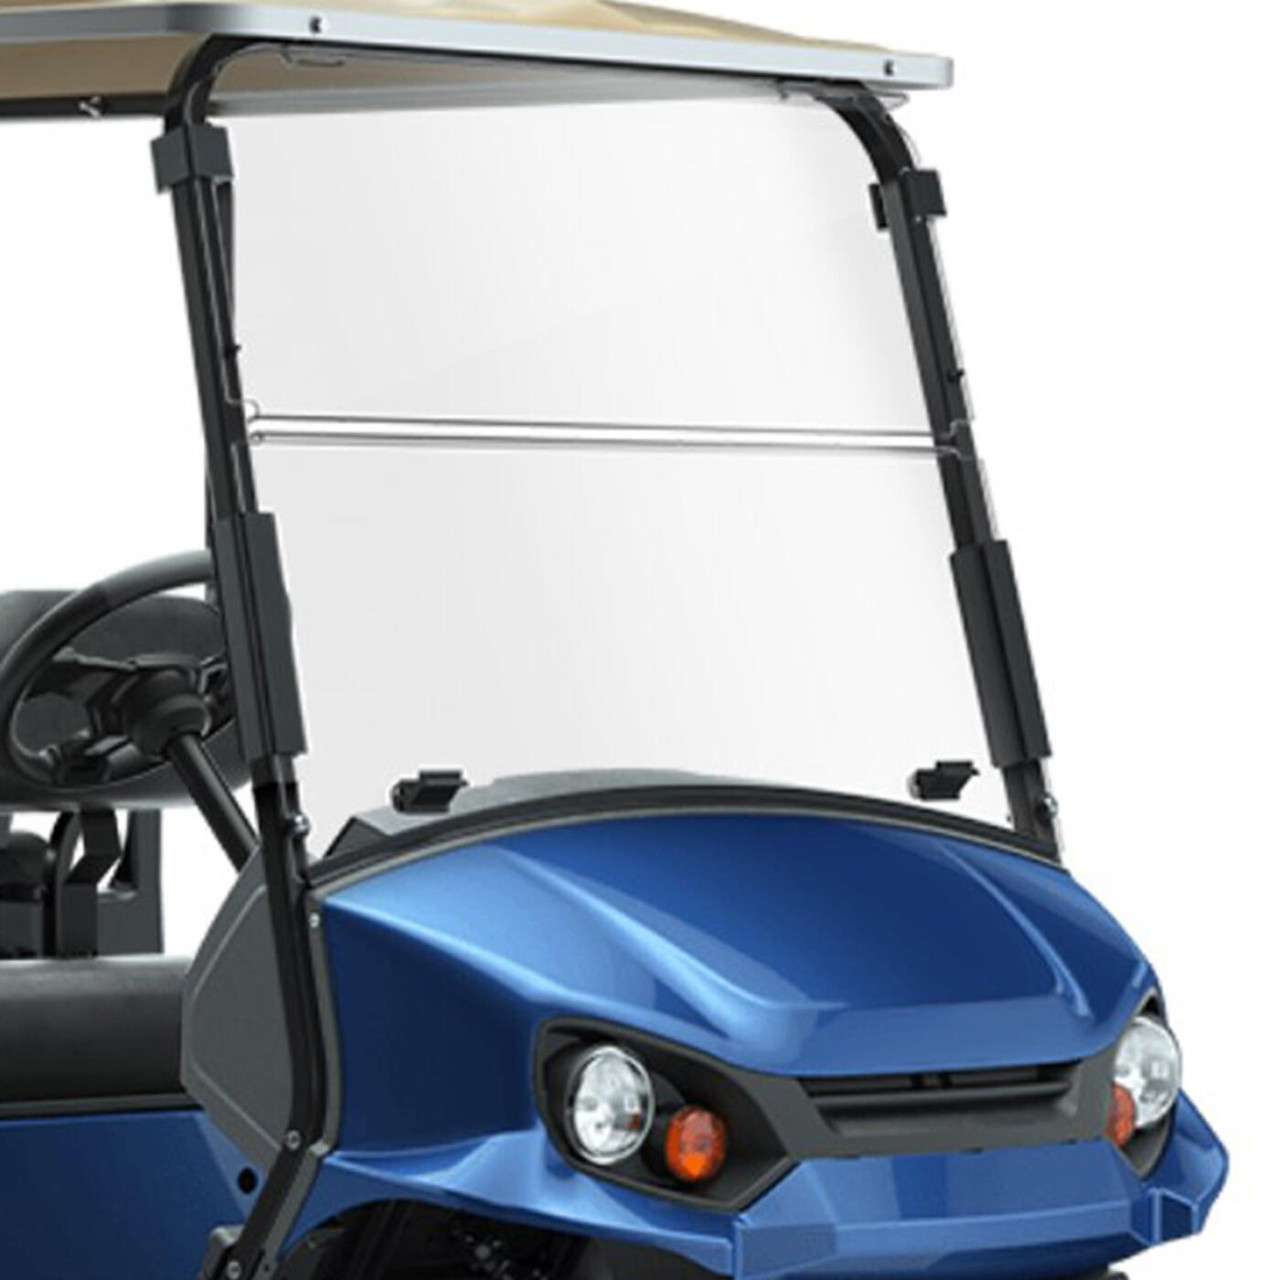 Clear E-Z-GO Express S2/S4/S6/L6 3/16 Golf Cart Fold-Down Windshield (2021-Up), 6026